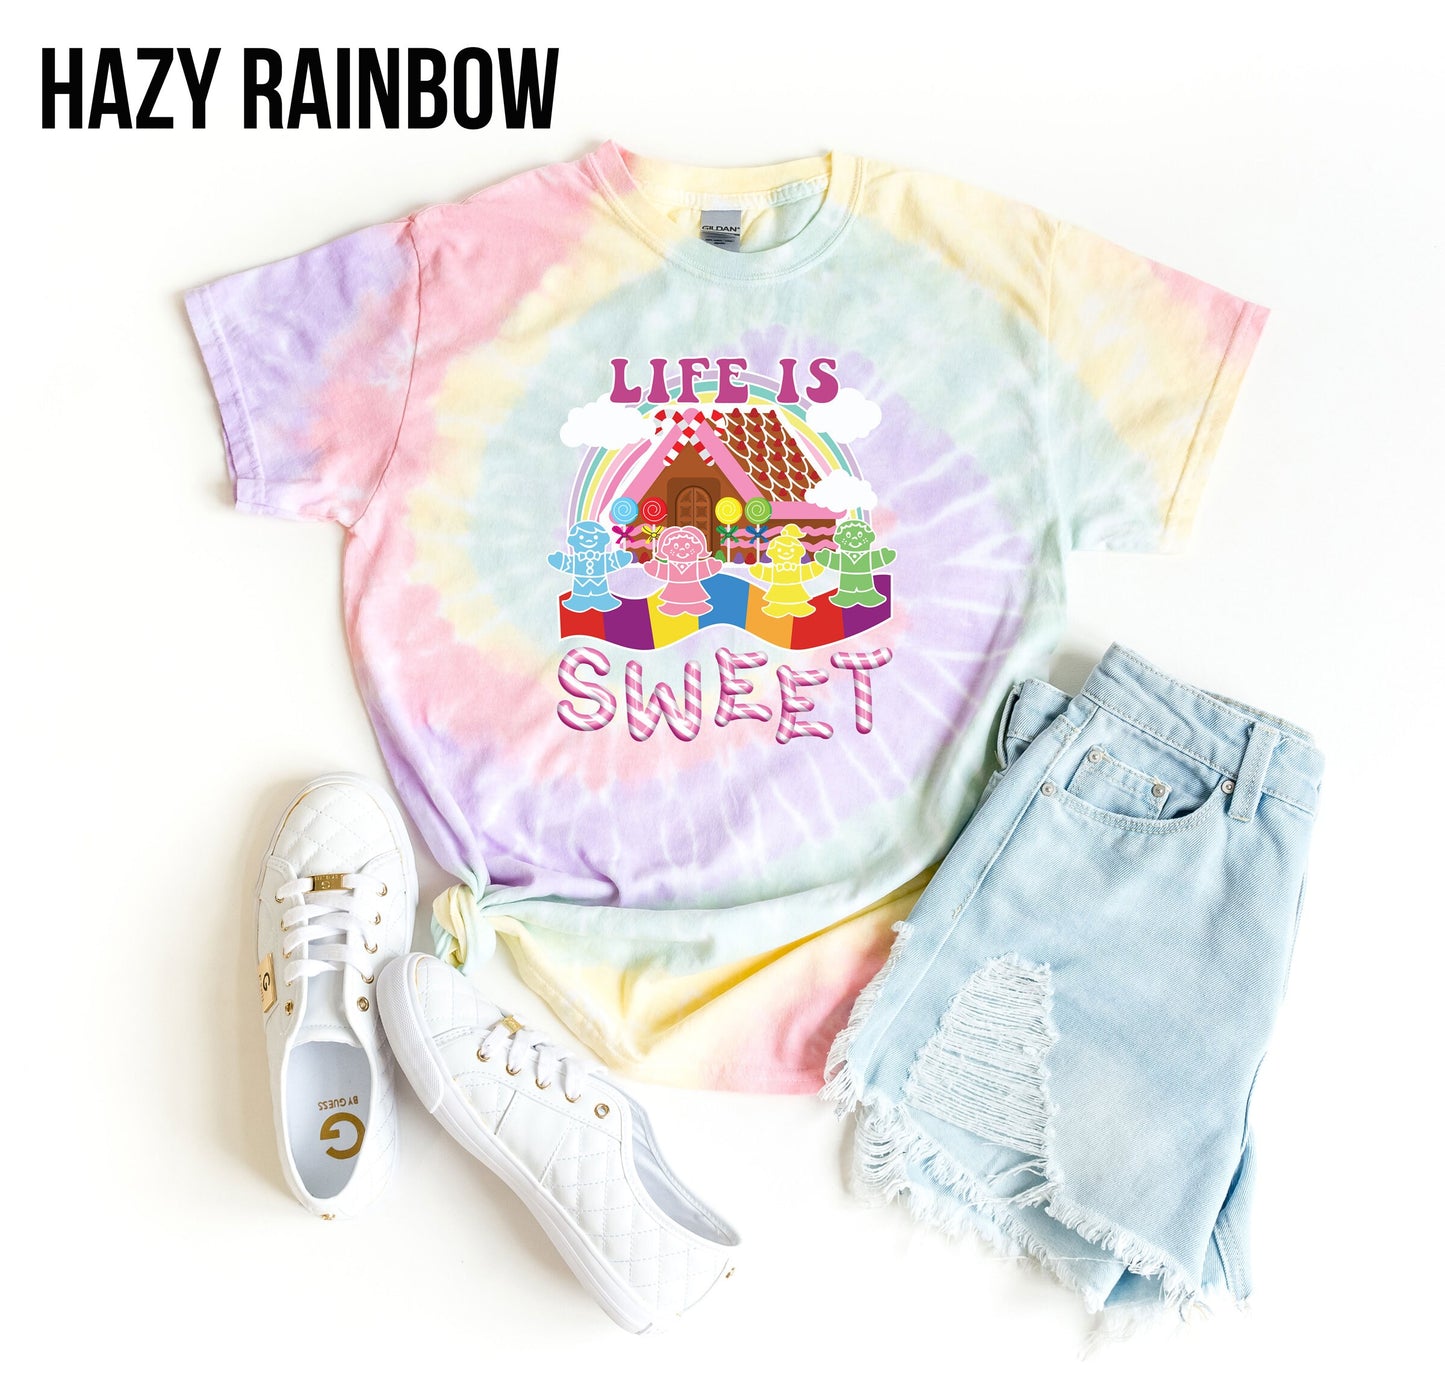 Retro Vintage Candy Land Game Board Graphic Tie Dye Ultra Cozy T-Shirt